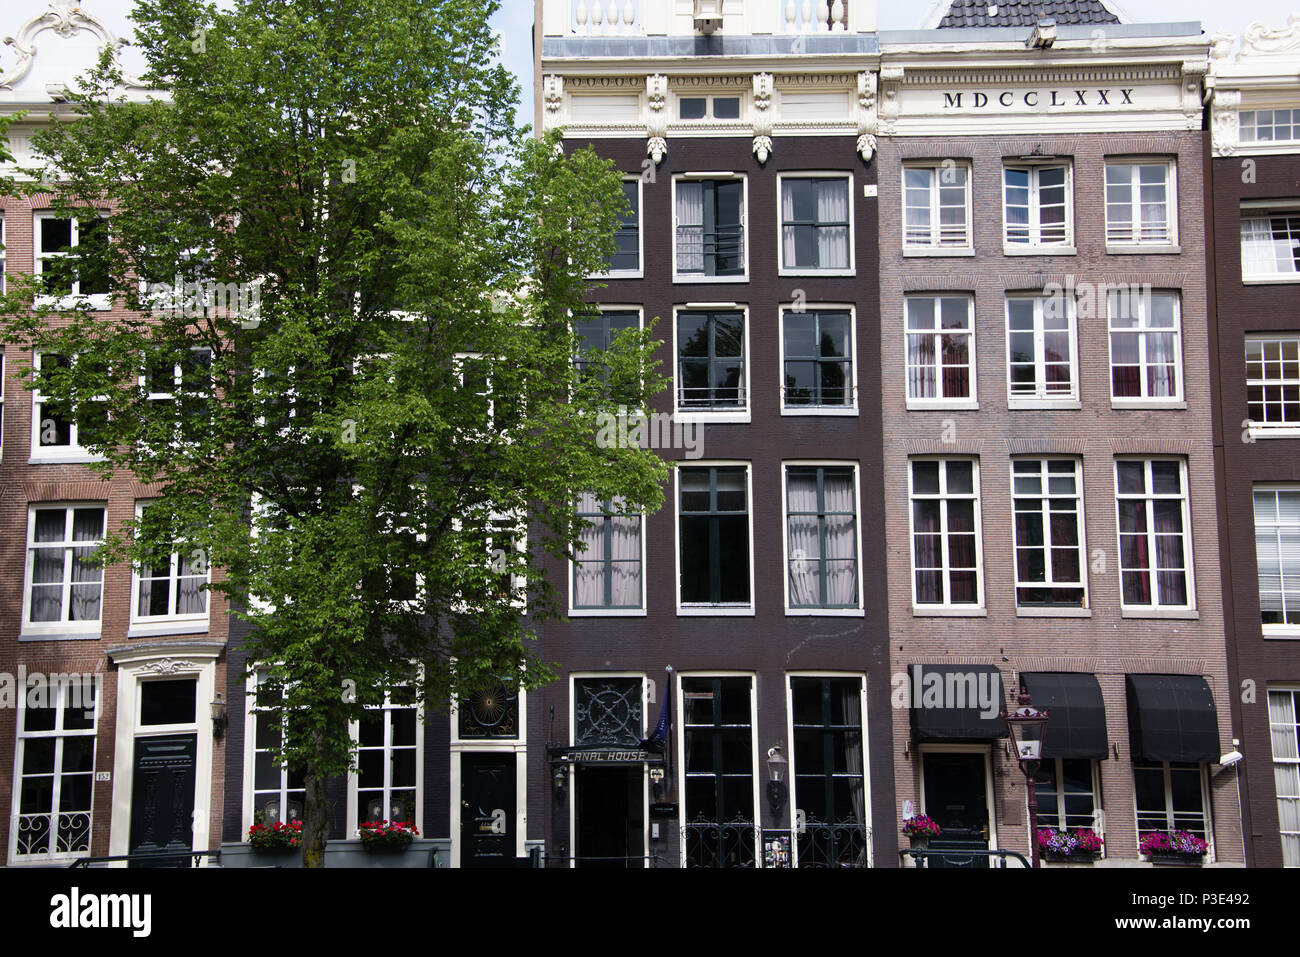 The distinctive style of architecture found by the canals in Amsterdam, Holland Stock Photo